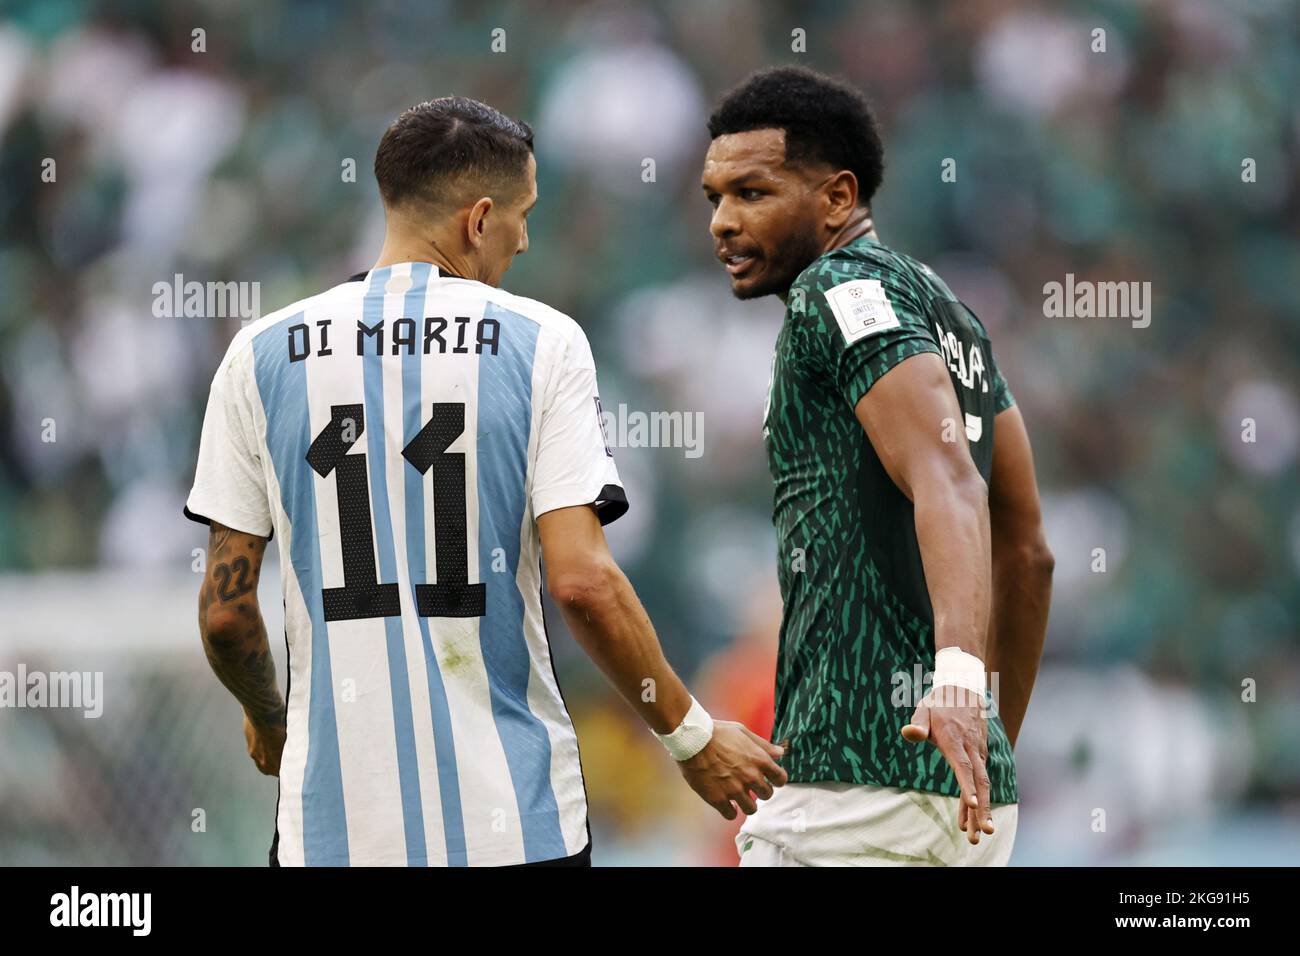 LUSAIL CITY - (l-r) Angel Di Maria of Argentina, Ali Al Bulayhi of Saudi Arabia during the FIFA World Cup Qatar 2022 group C match between Argentina and Saudi Arabia at Lusail stadium on November 22, 2022 in Lusail City, Qatar. AP | Dutch Height | MAURICE OF STONE Credit: ANP/Alamy Live News Stock Photo